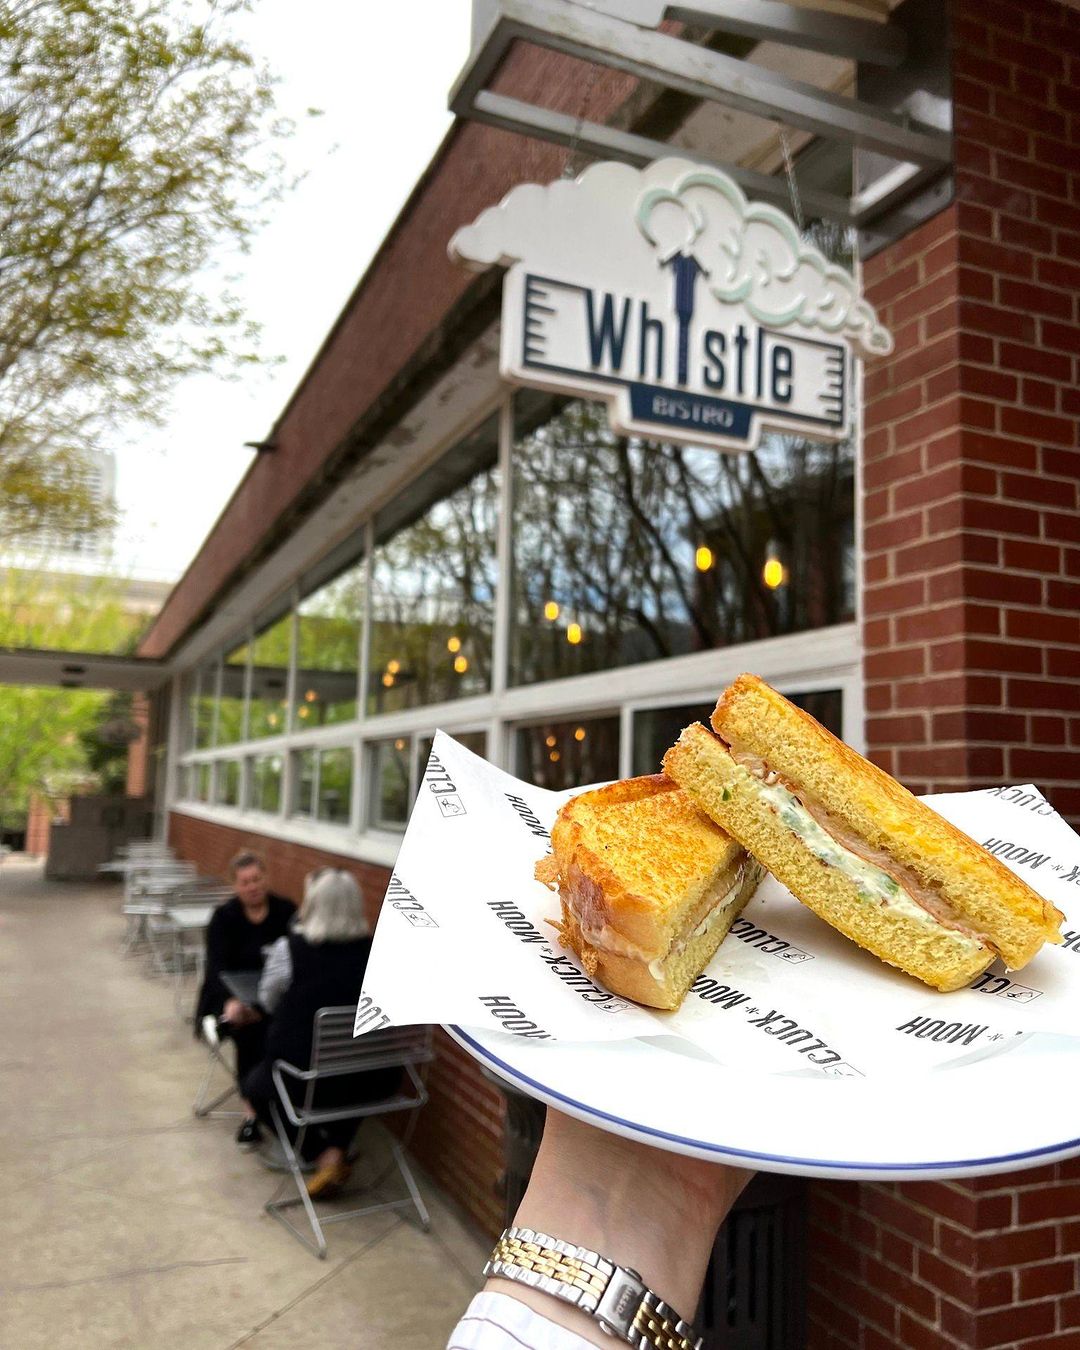 Sandwich in front of Whistle Bistro